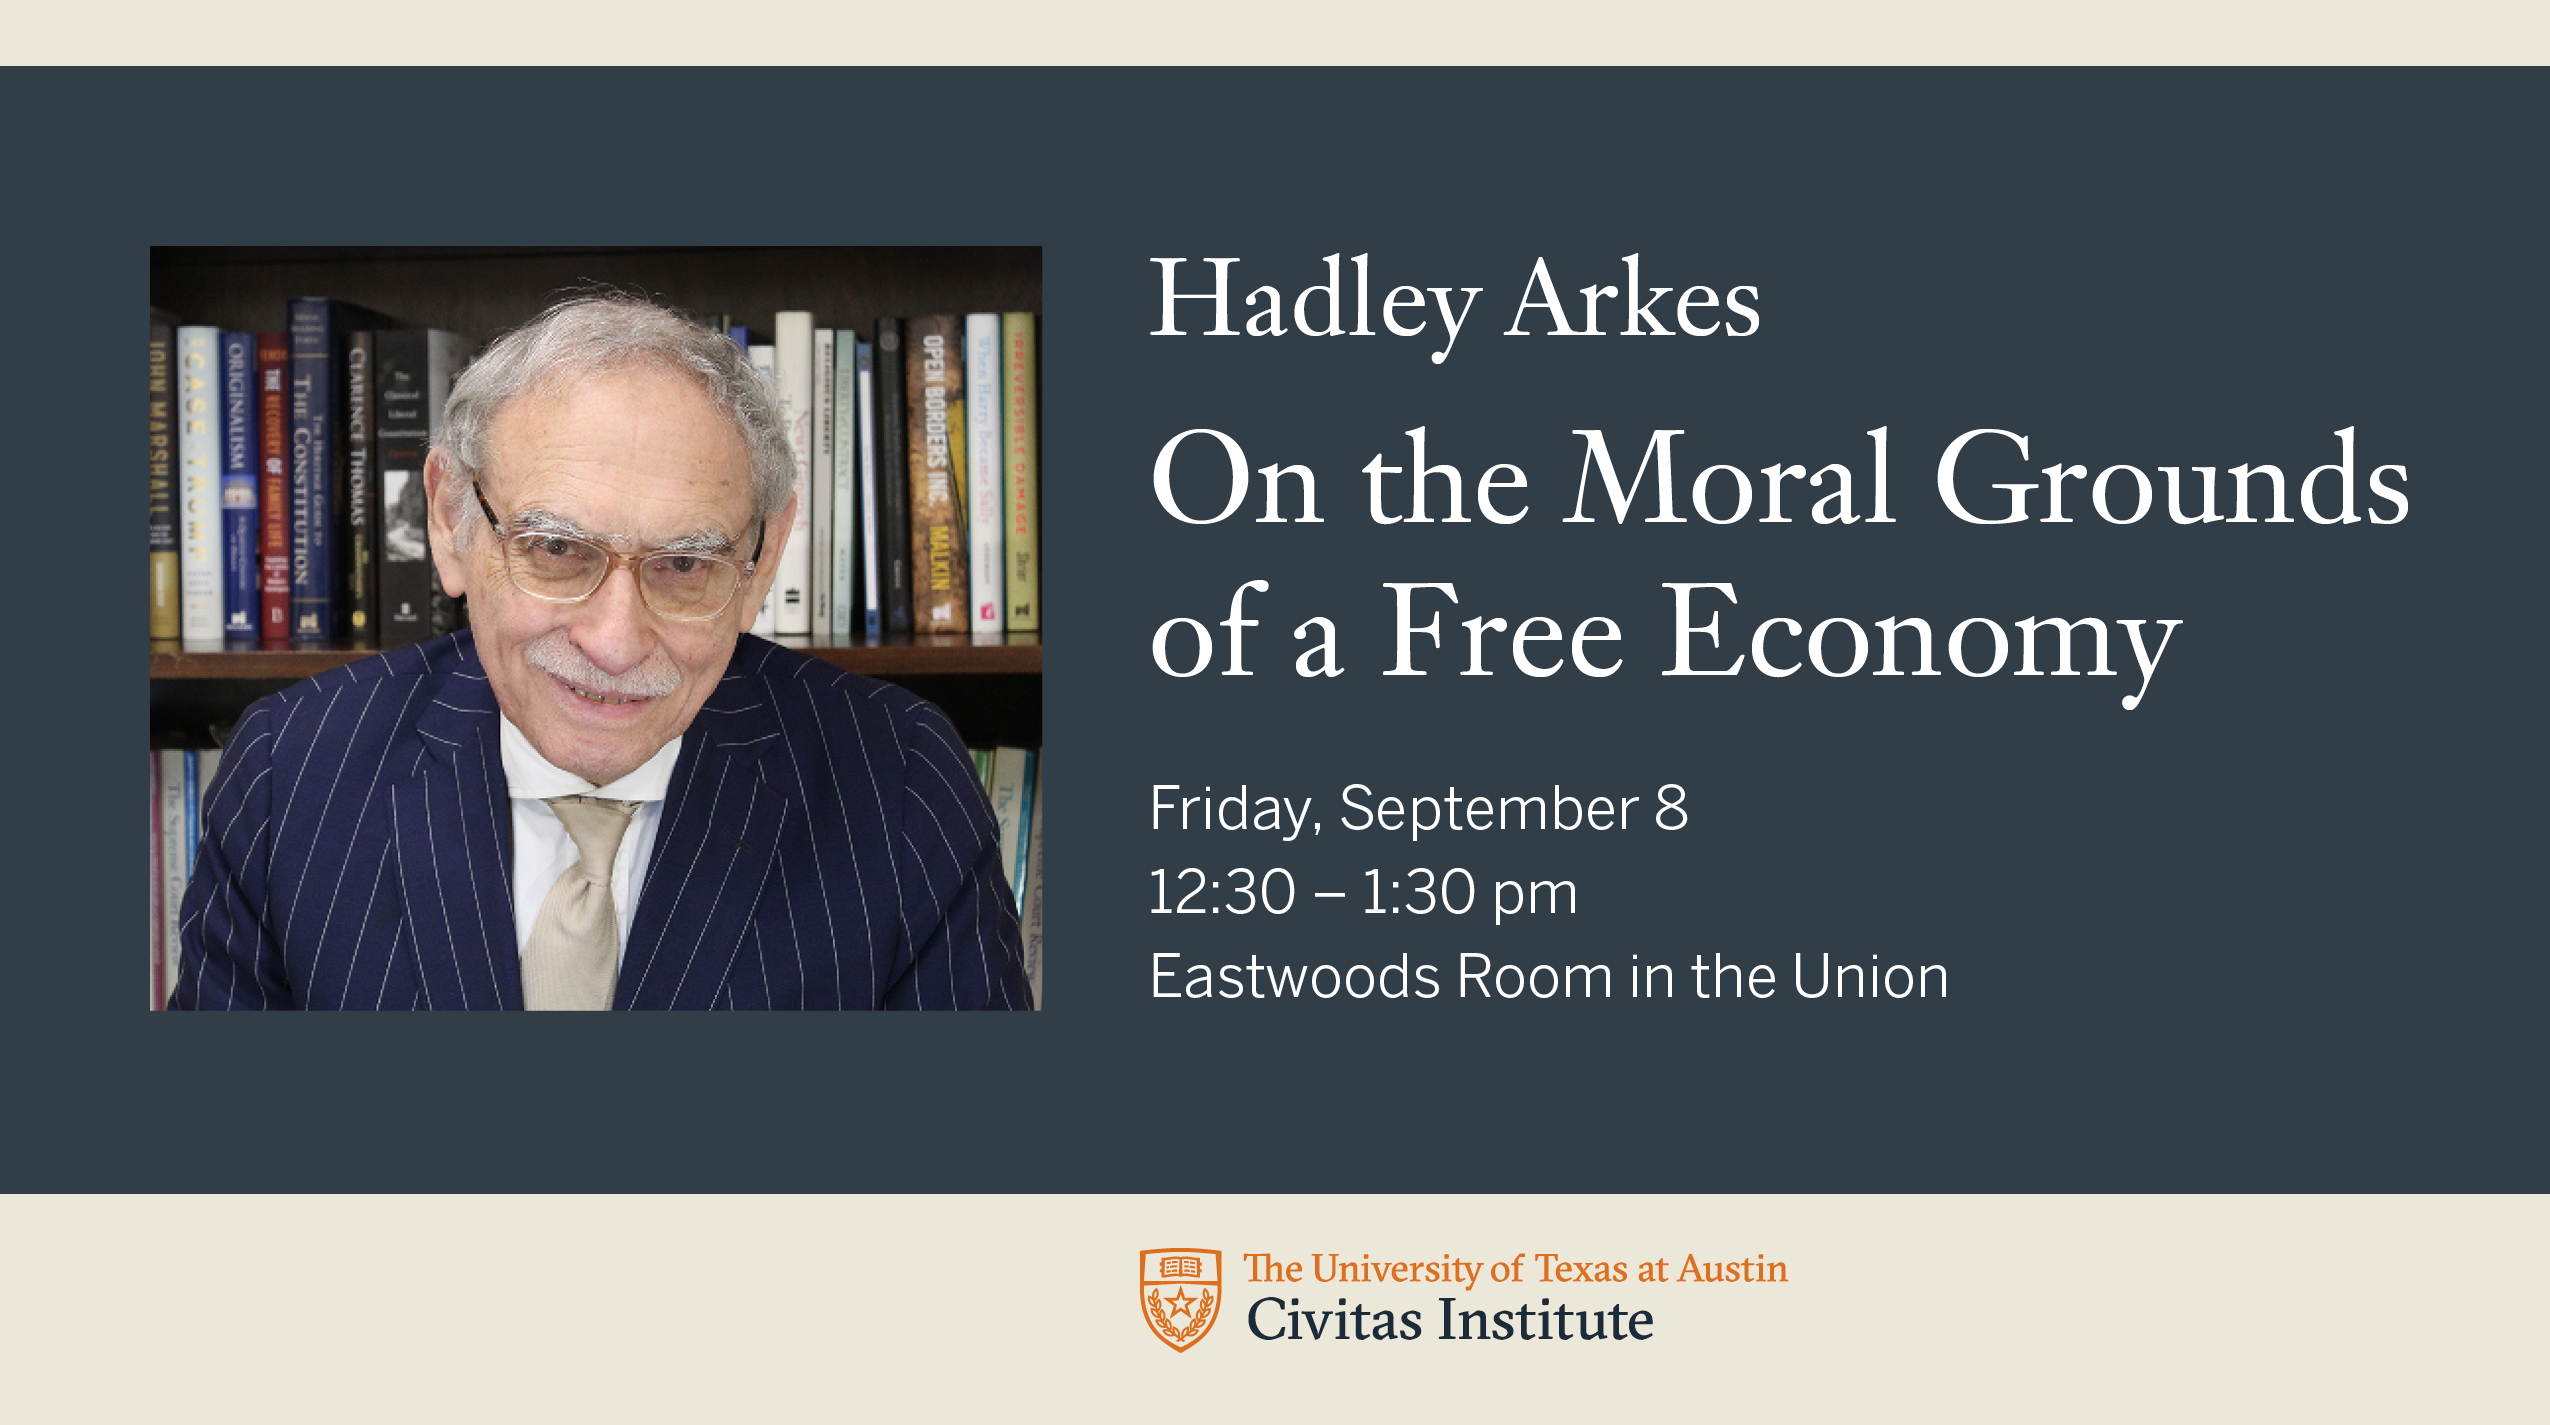 Hadley Arkes event post On the Moral Grounds of a Free Economy Friday, Sept. 8 12:30-1:30 pm Eastwoods Room in the Union